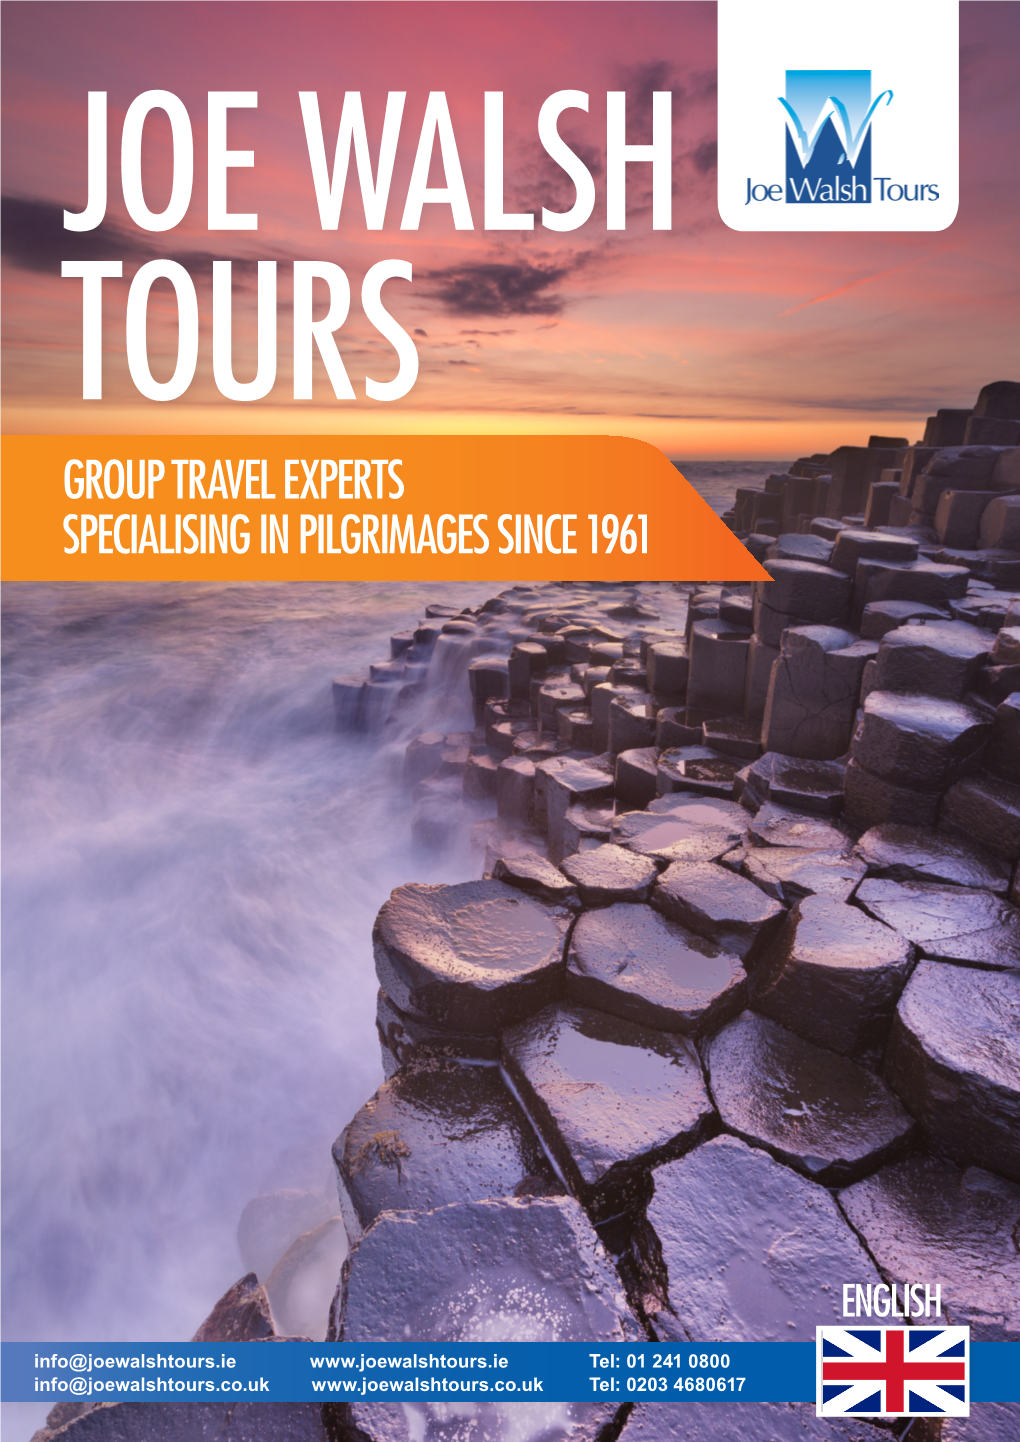 Group Travel Experts Specialising in Pilgrimages Since 1961